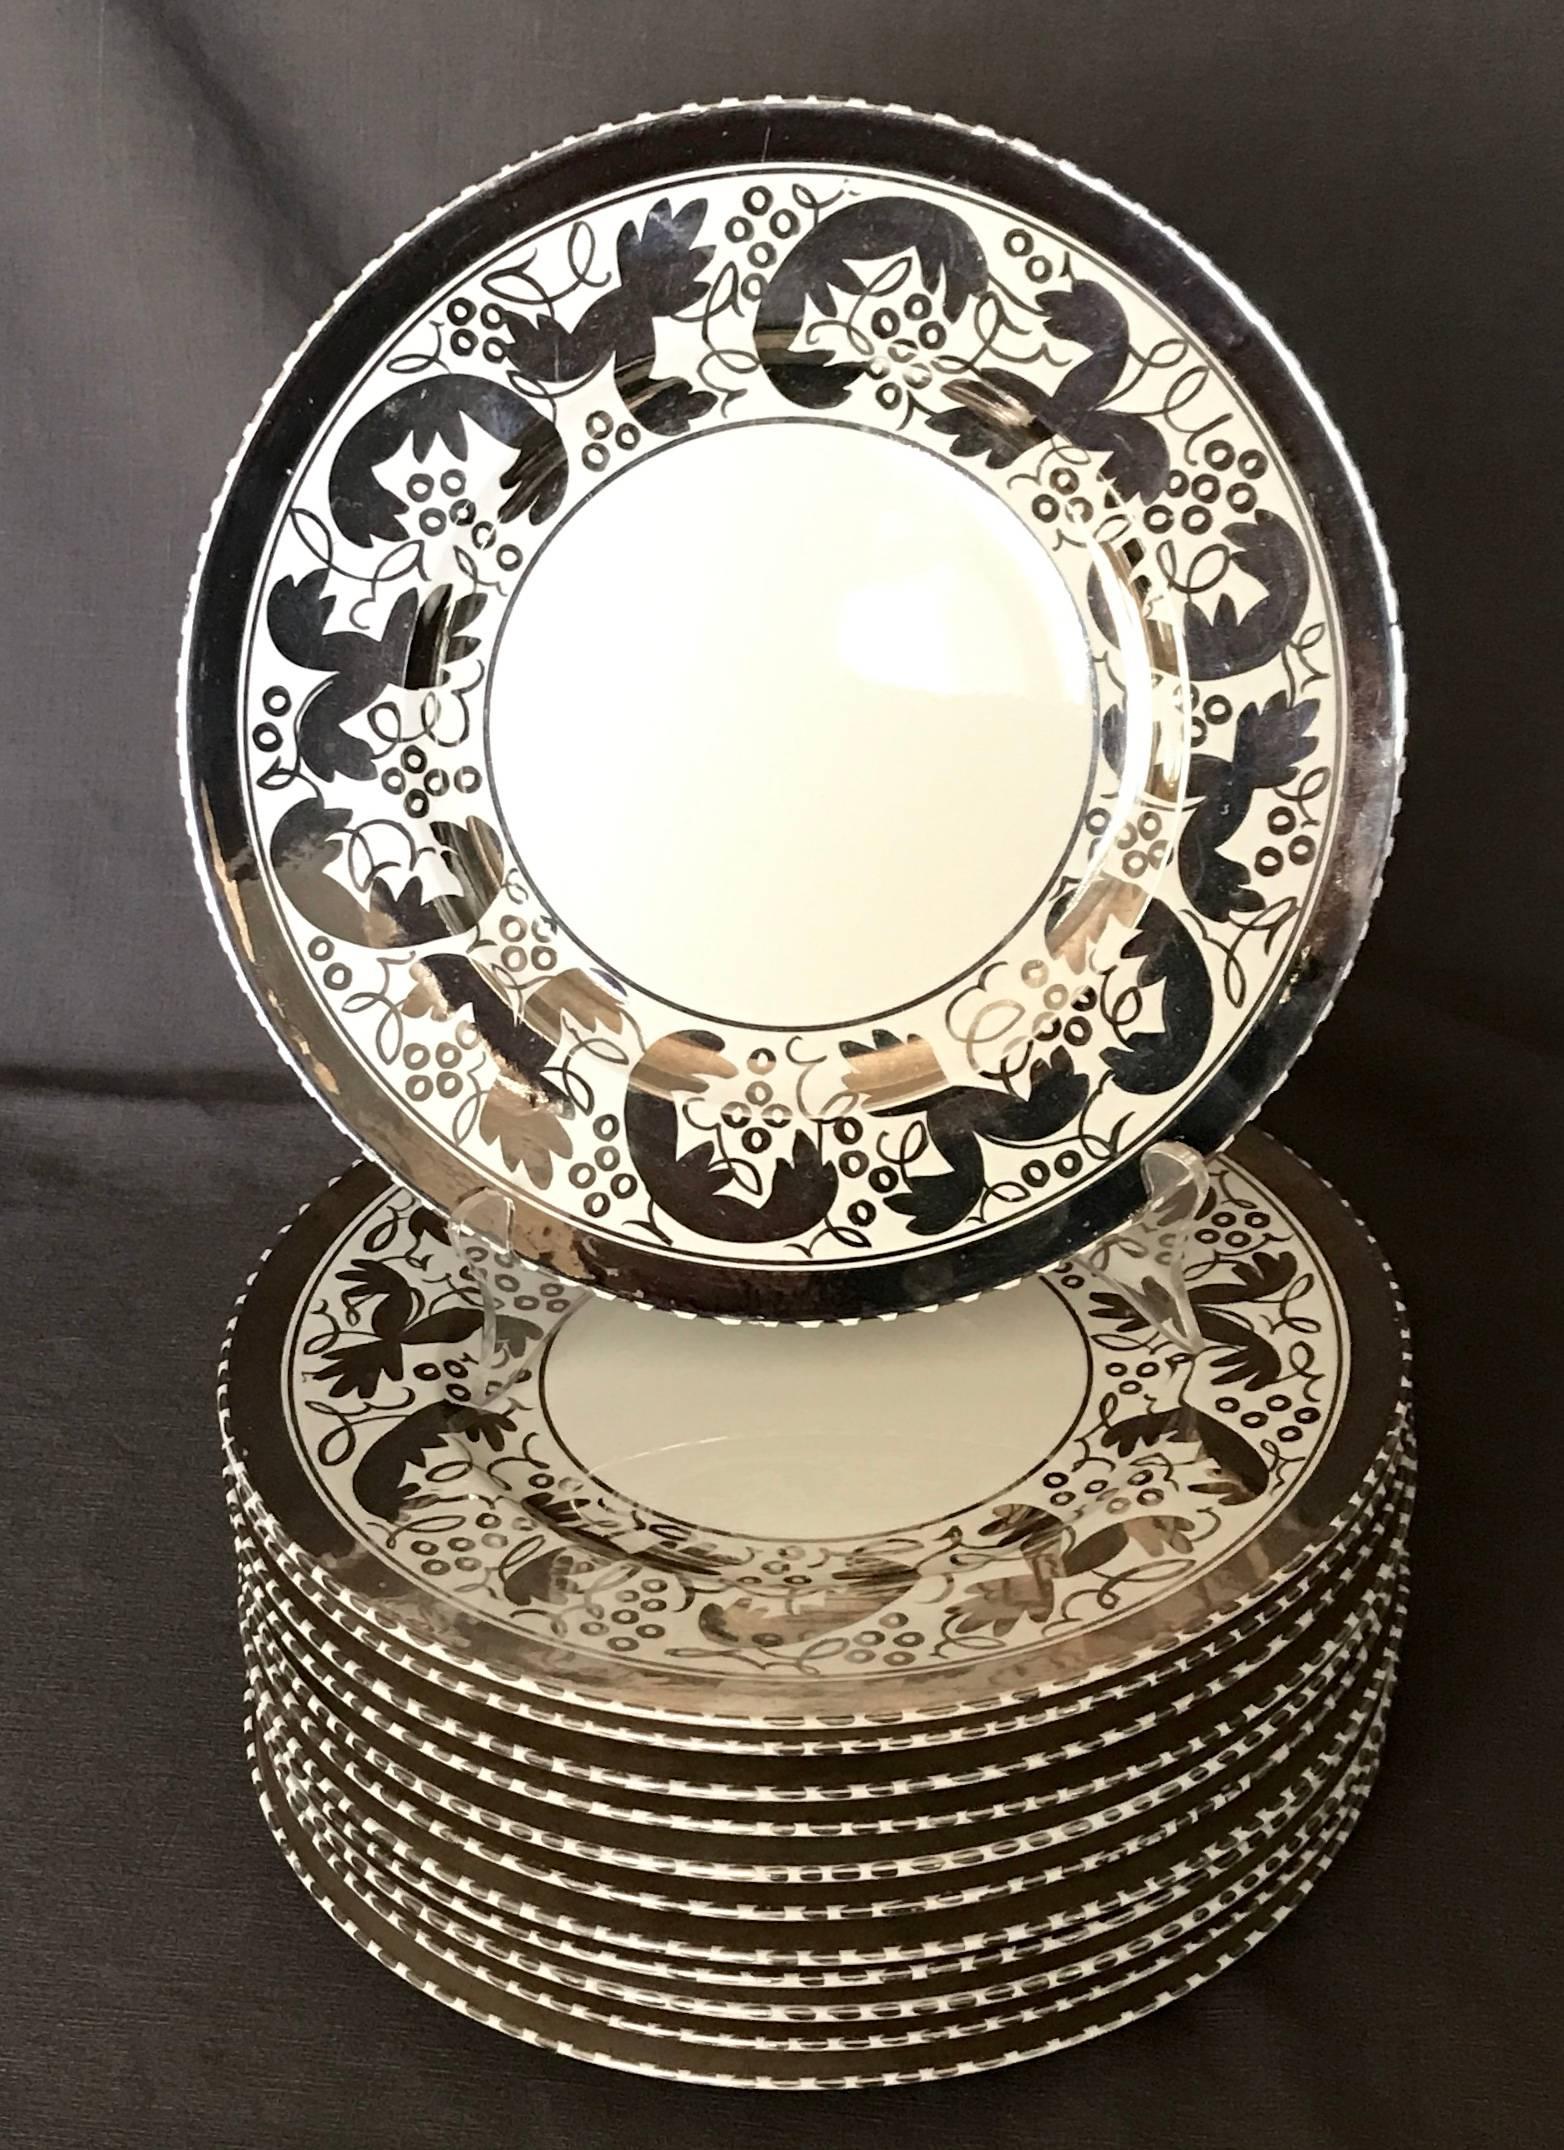 Set of twelve vintage Wedgwood platinum dinner plates in the original Amherst pattern. Large dinner size with hand-painted platinum band and stylized grape leaf border. Impressed marks for Wedgwood. England, circa 1929
Dimensions: 10.88